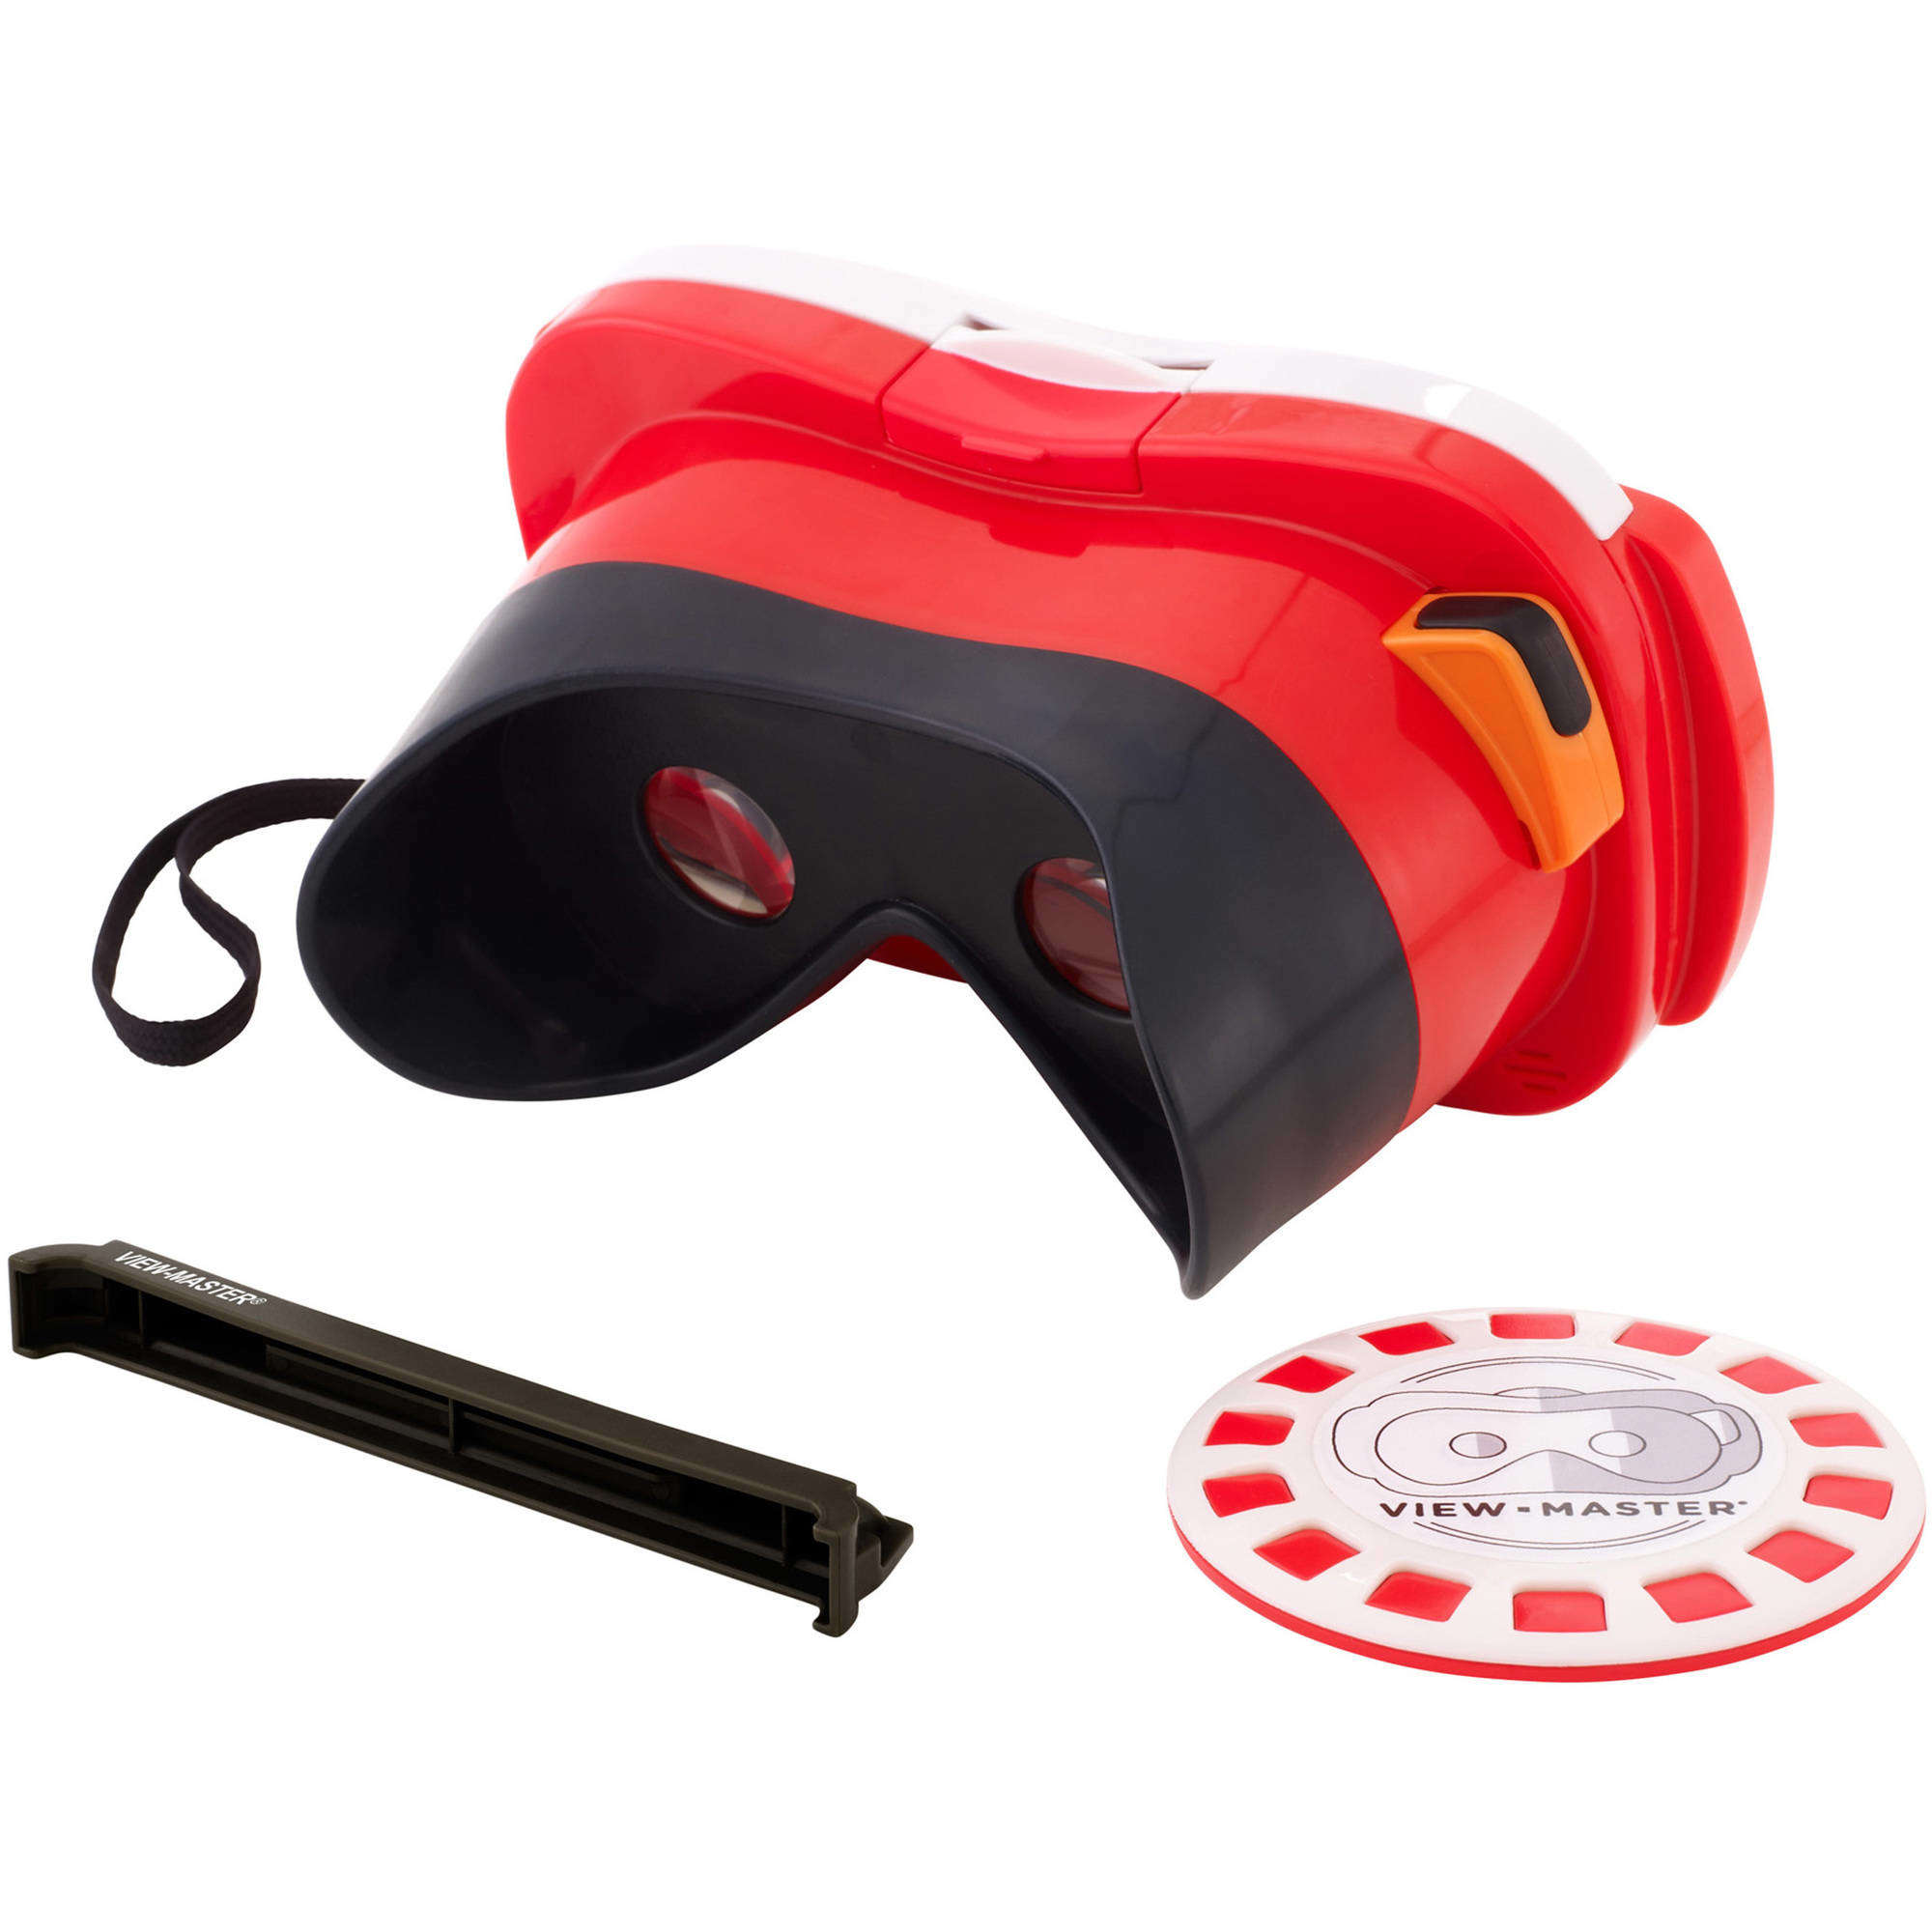 View-Master Virtual Reality Starter Pack - image 5 of 21